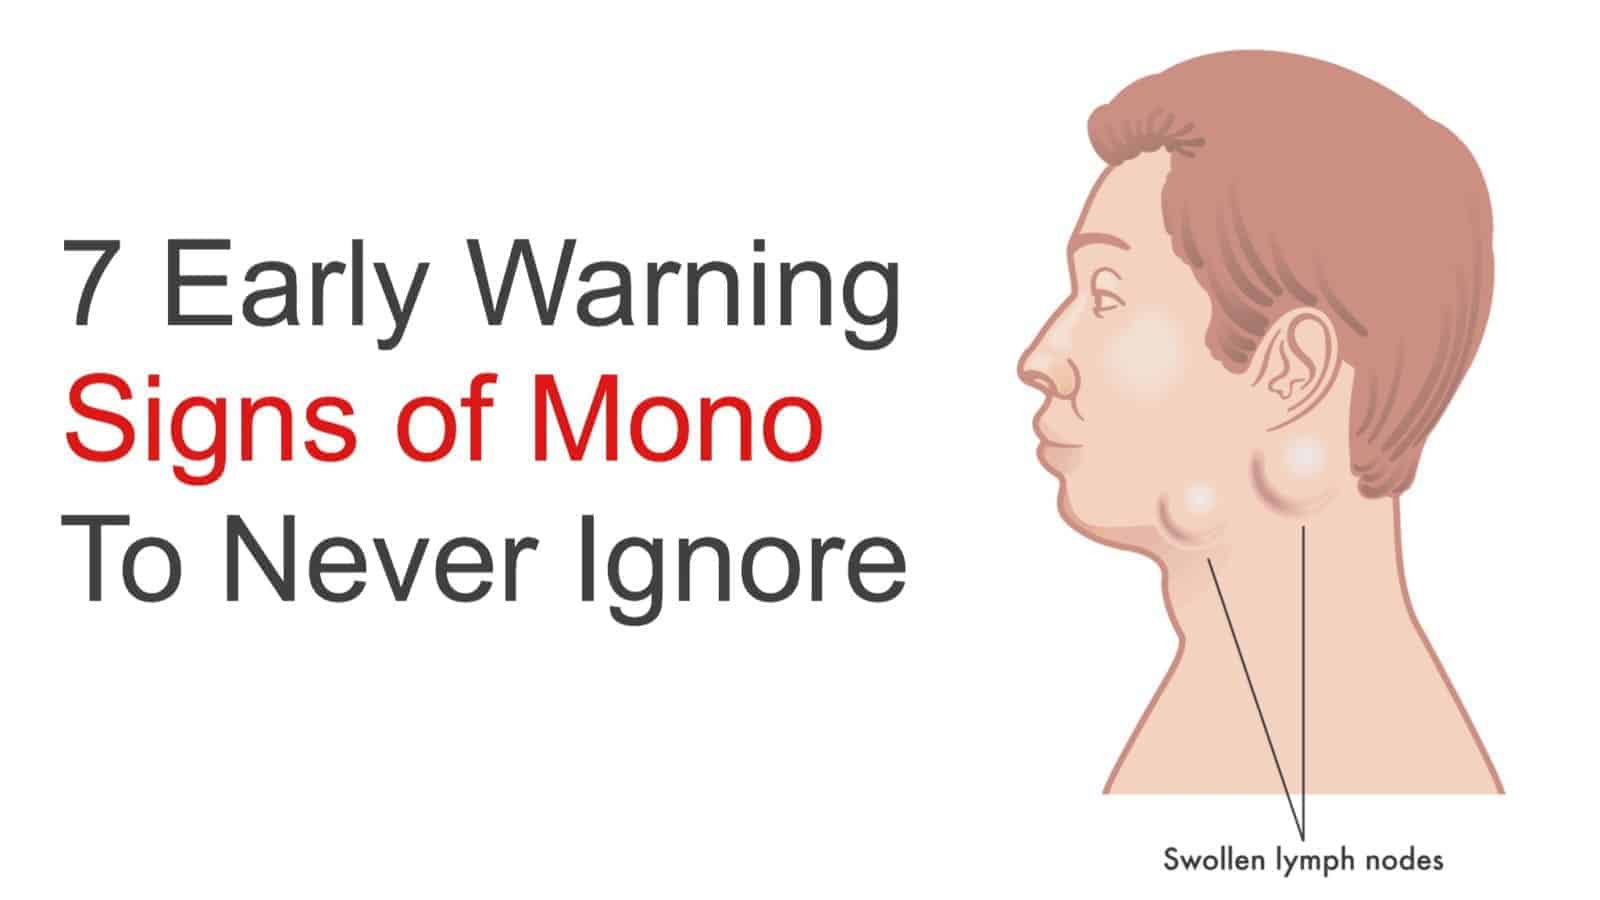 7 Early Warning Signs of Mono to Never Ignore